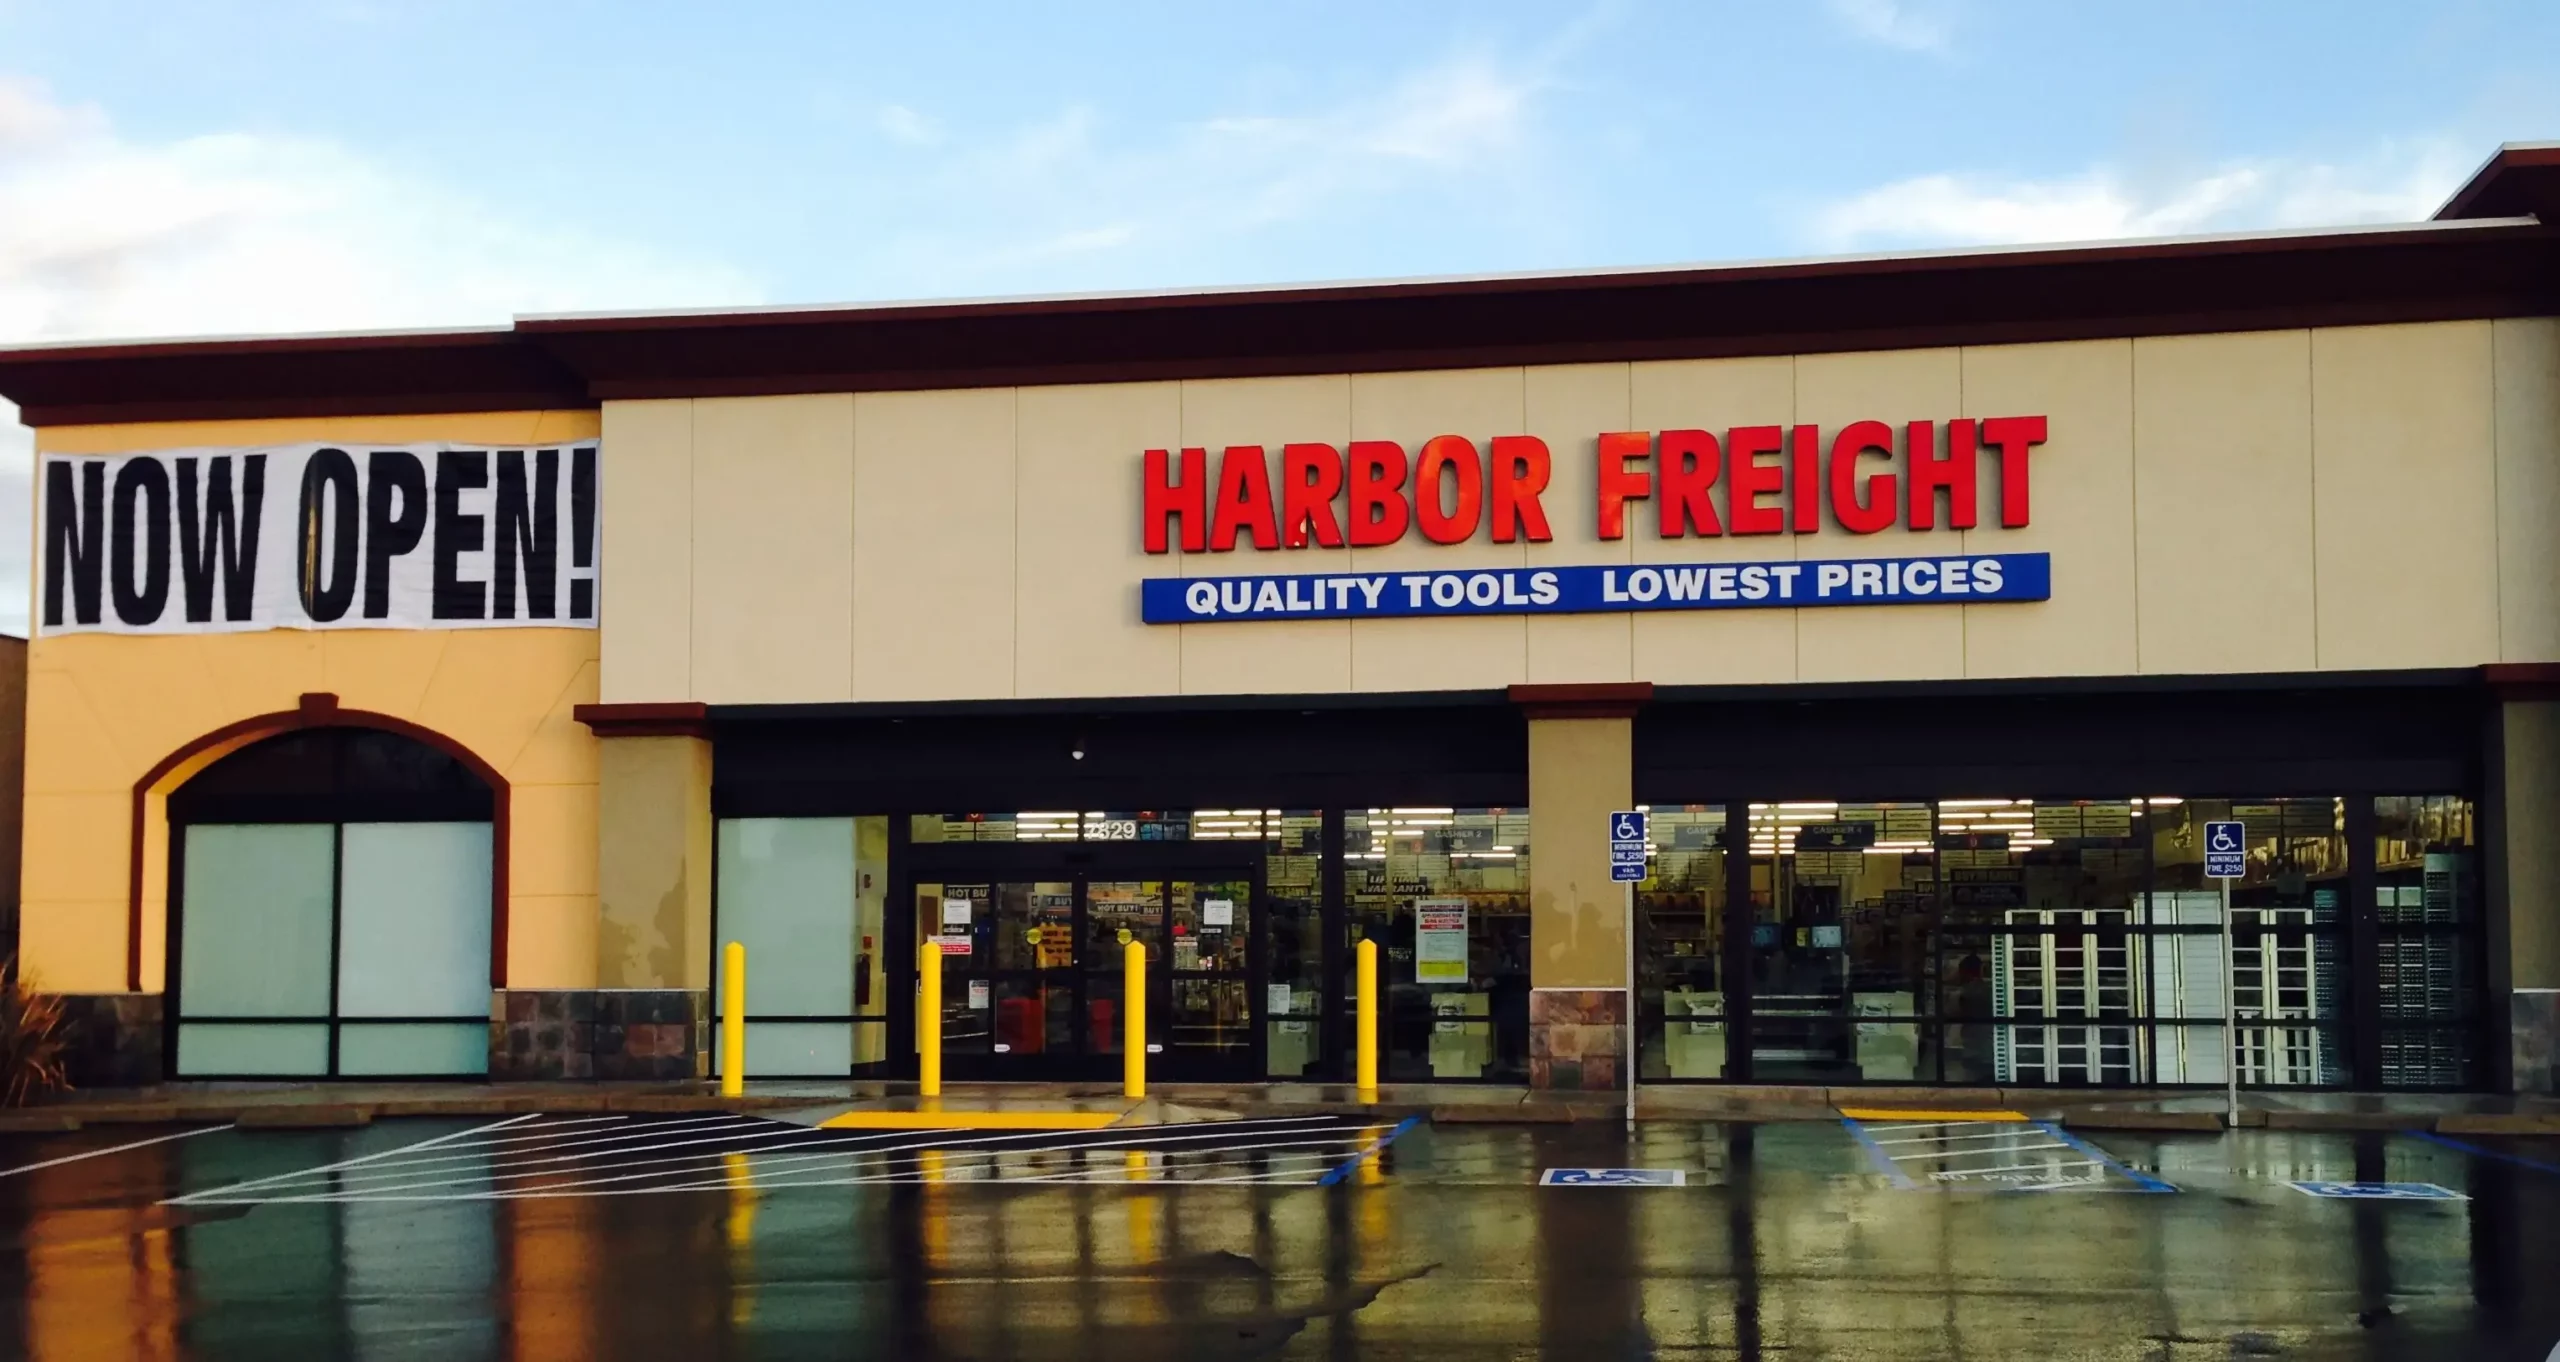 Ways to Confirm Harbor Freight Store Hours